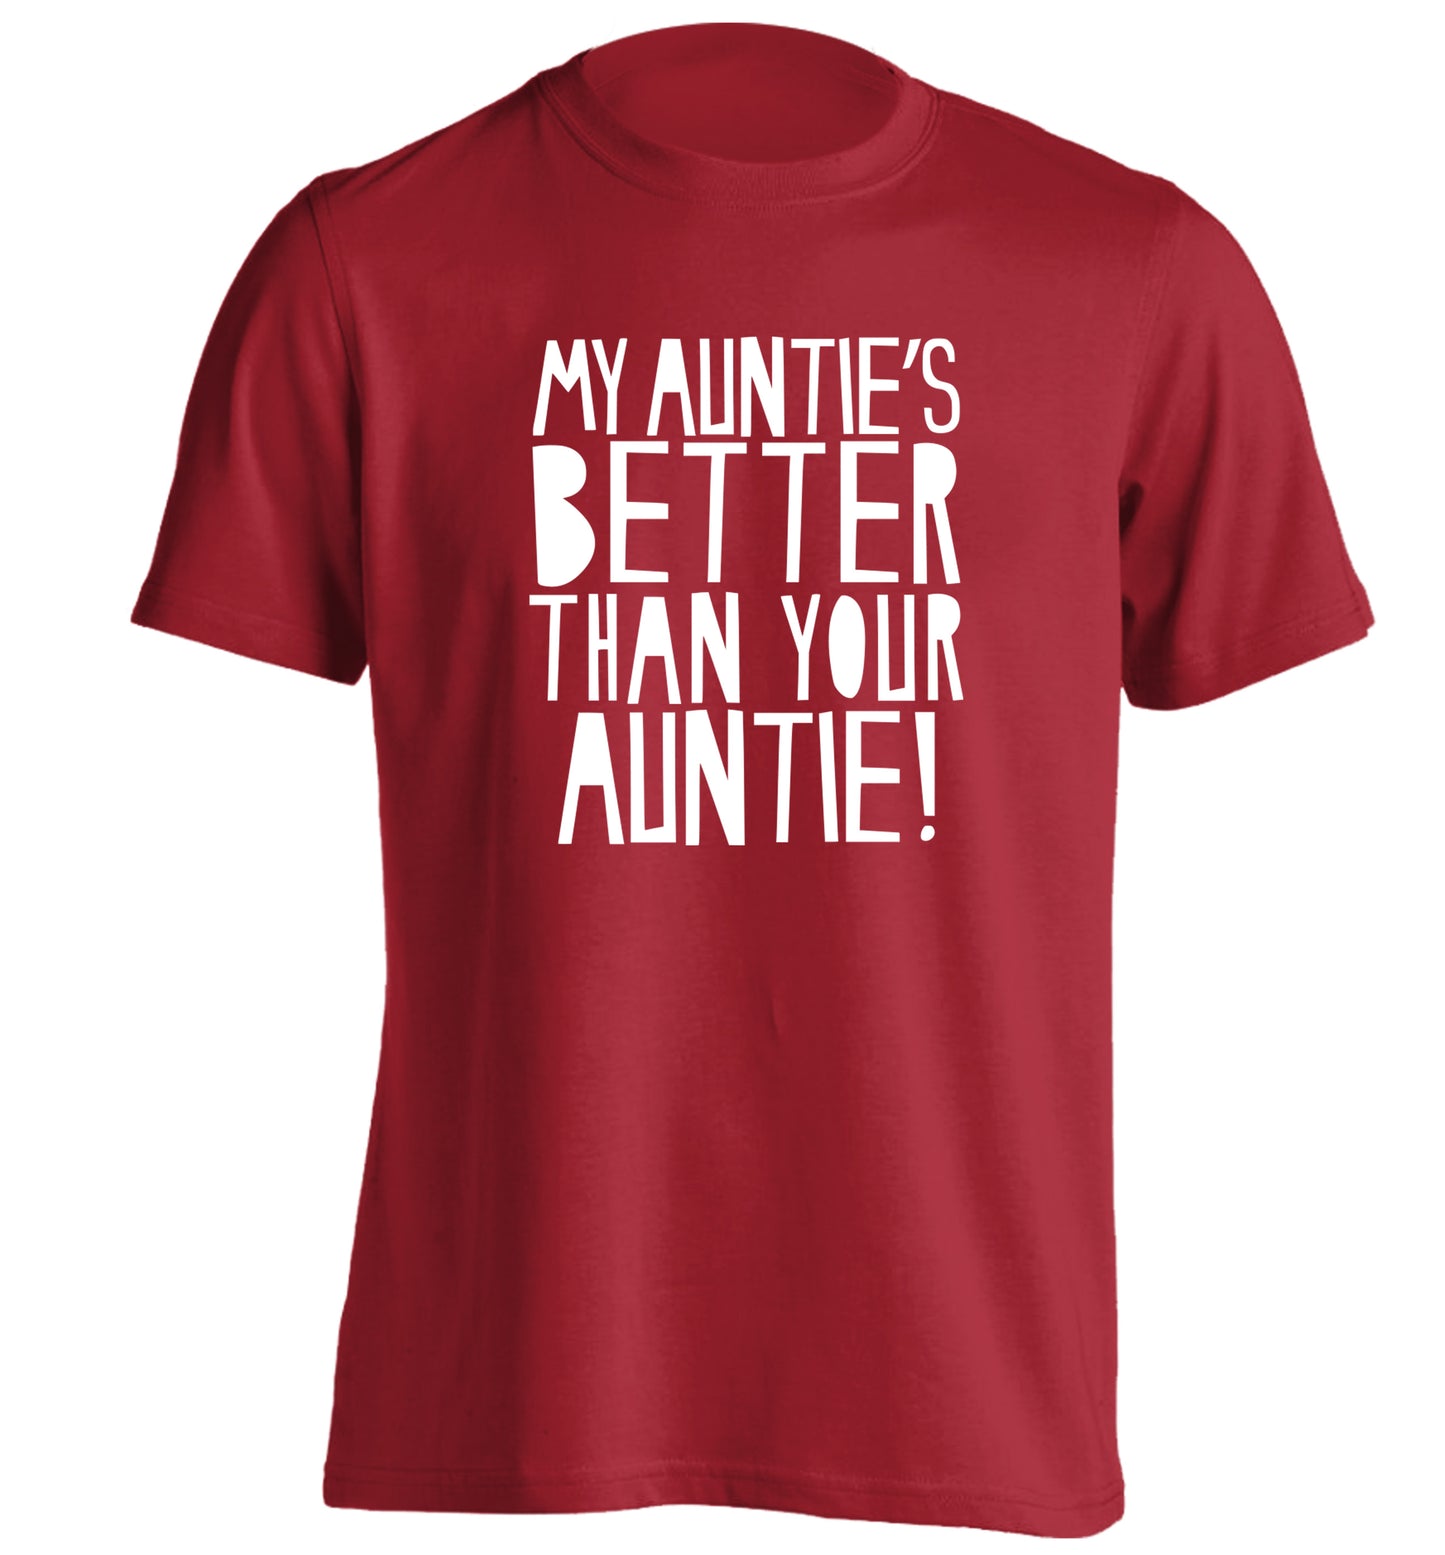 My auntie's better than your auntie adults unisex red Tshirt 2XL